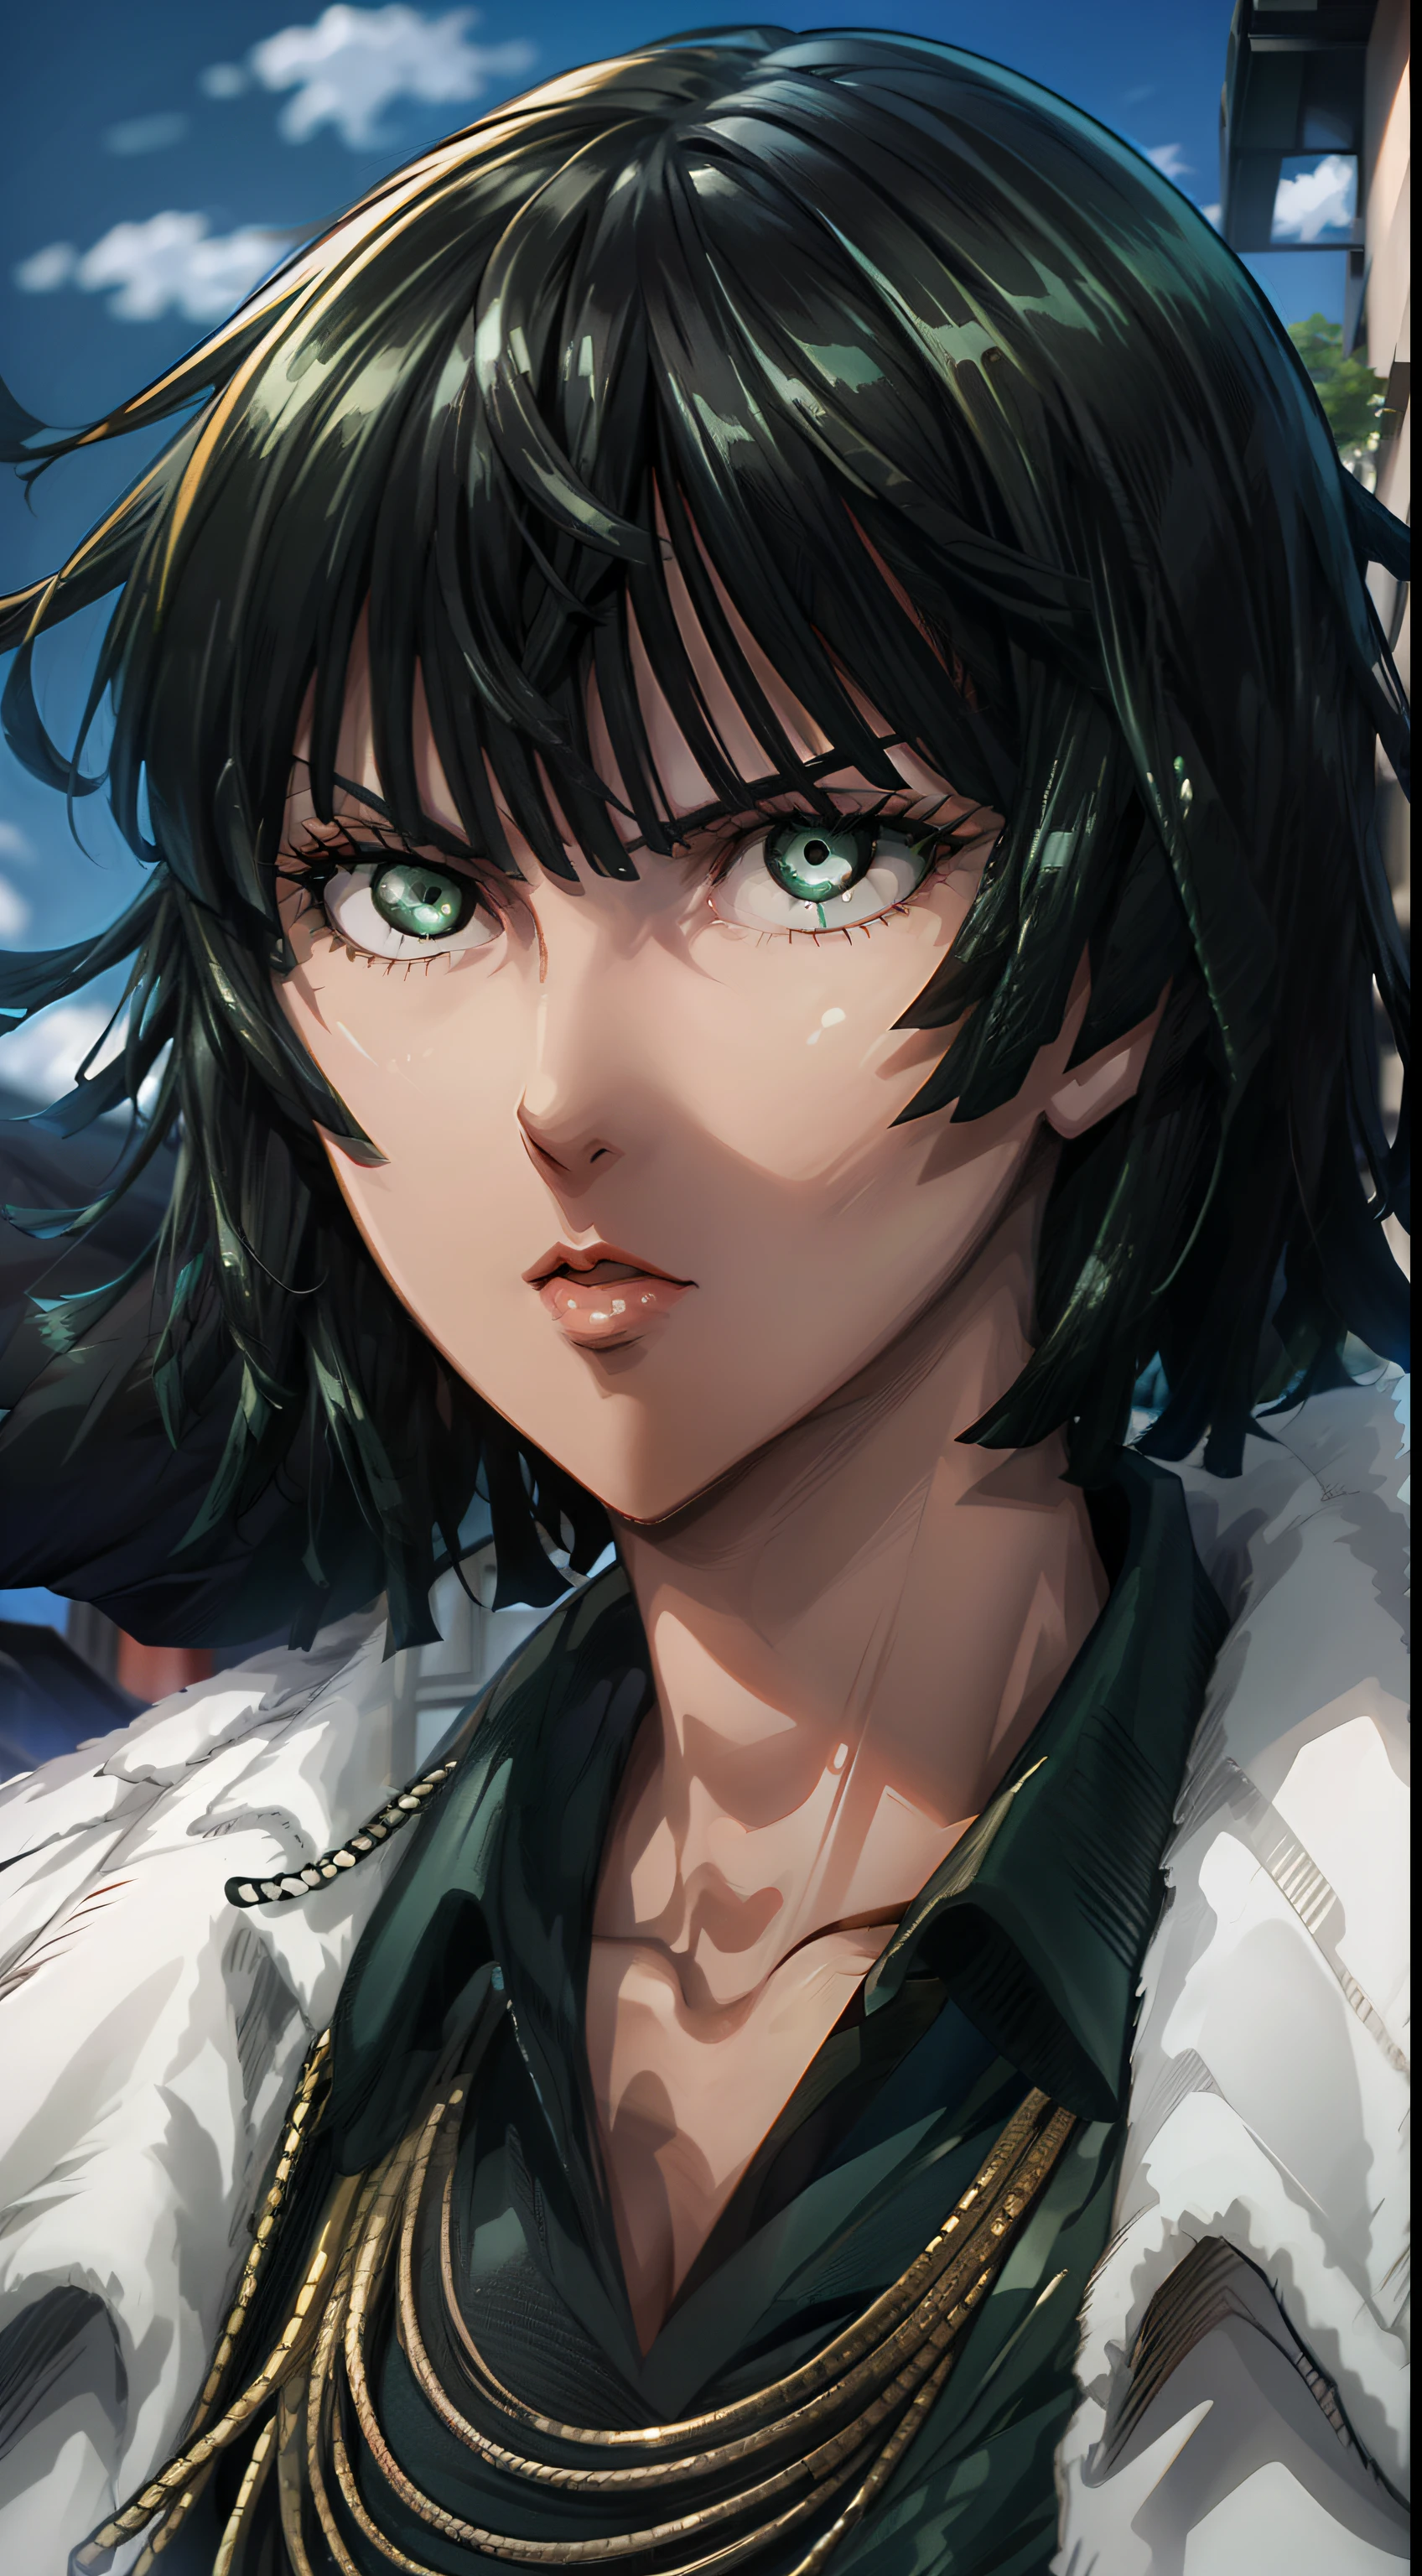 24-year-old girl with short green hair wearing frock and shirt  beautiful and feminine face, long chin, proportionally feminine body, resembling Fubuki from One Punch Man - 4K HD quality. Backlighting near road